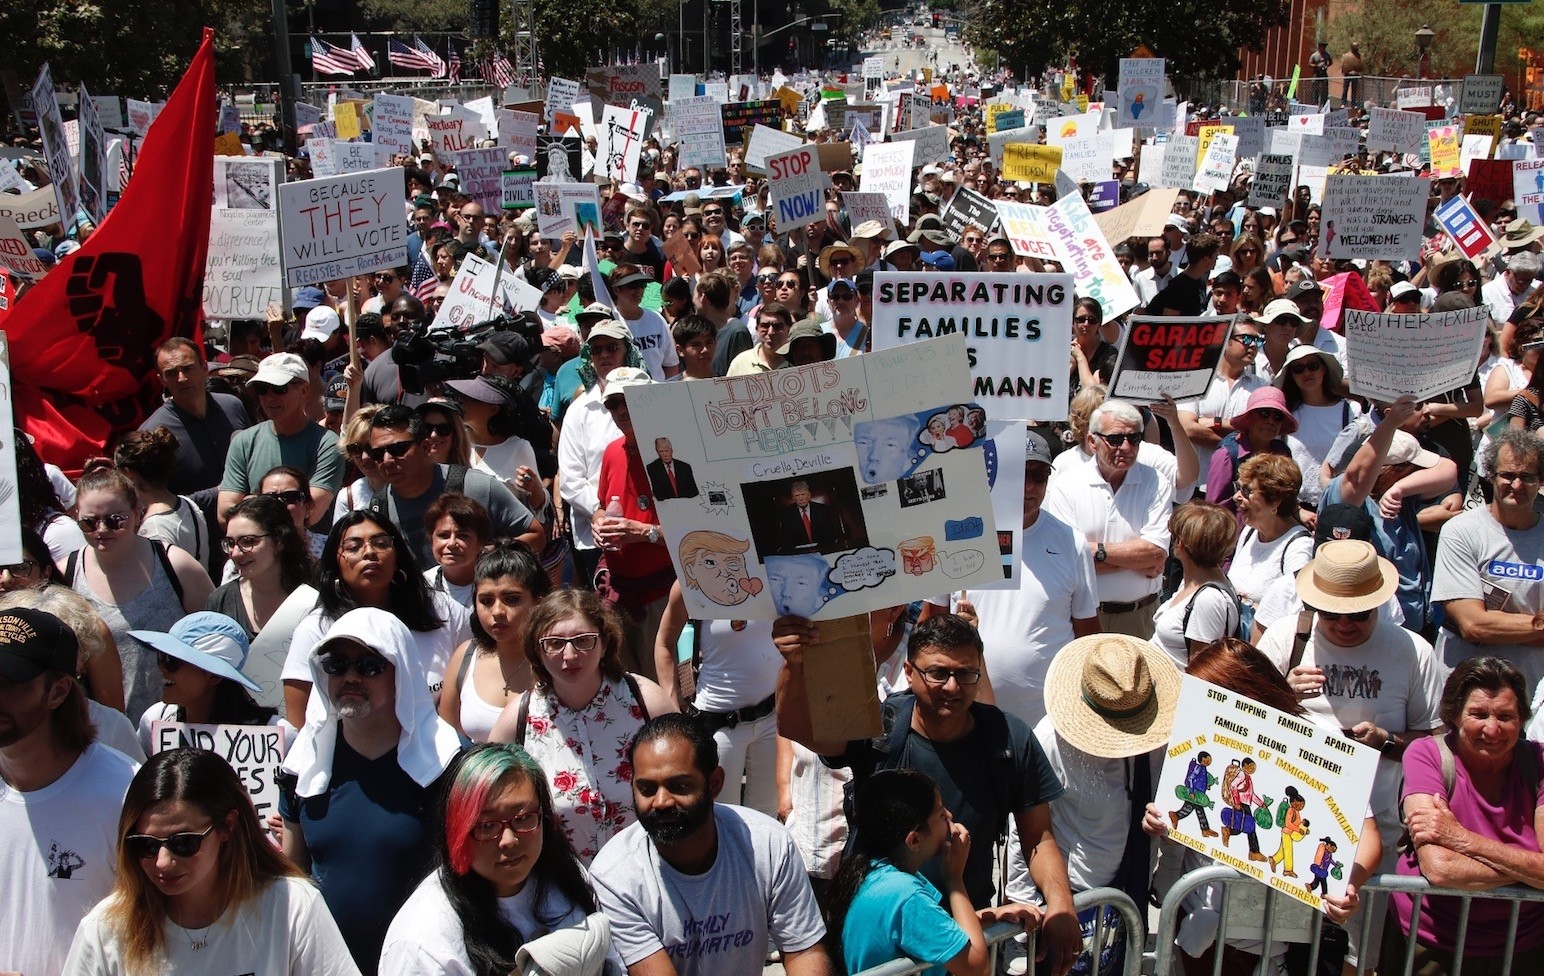 Thousands march in protest of the immigration policies of U.S. President Donald Trump, Los Angeles, CA., June 30.